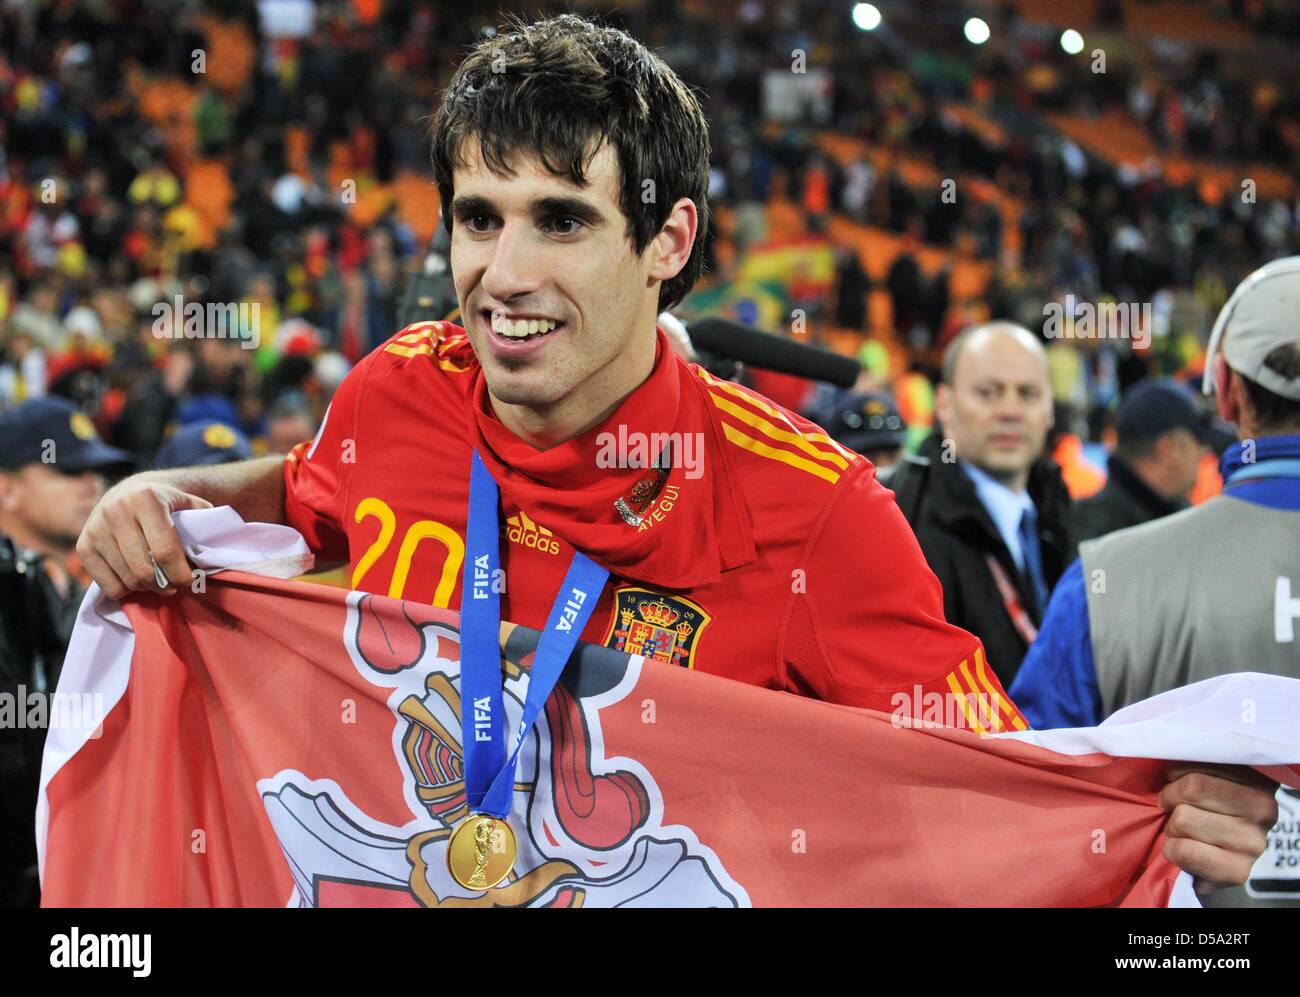 Javier Martinez of Spain celebrates after the final whistle of the 2010 FIFA World Cup final match between the Netherlands and Spain at the Soccer City Stadium in Johannesburg, South Africa 11 July 2010. Photo: Bernd Weissbrod dpa - Please refer to http://dpaq.de/FIFA-WM2010-TC Stock Photo